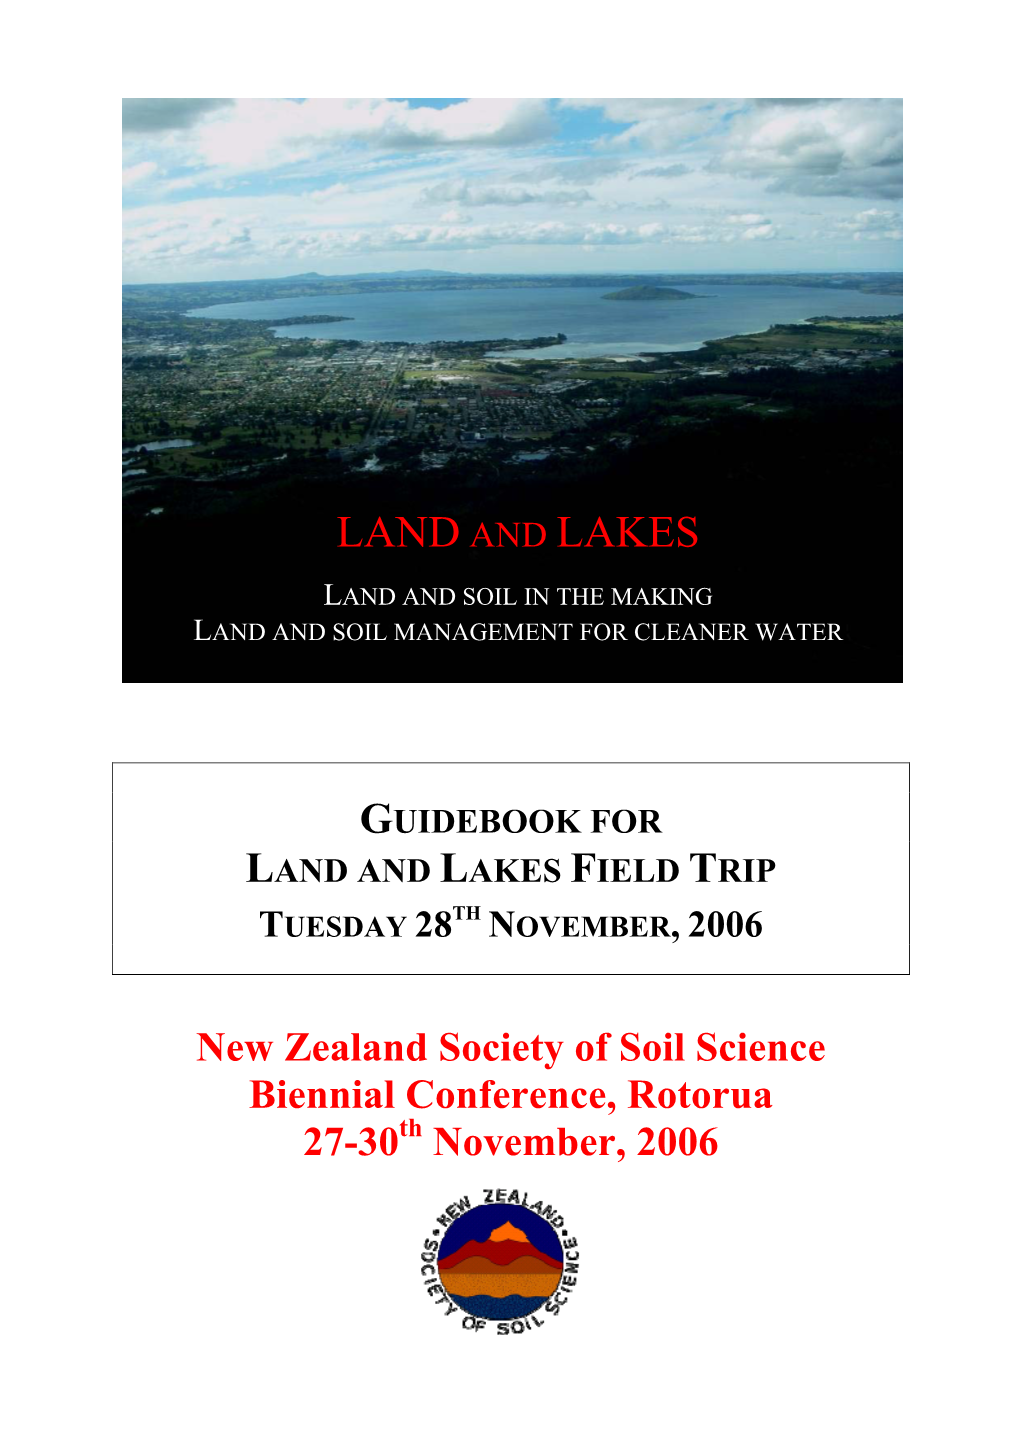 Guidebook for Land and Lakes Field Trip Tuesday 28Th November, 2006